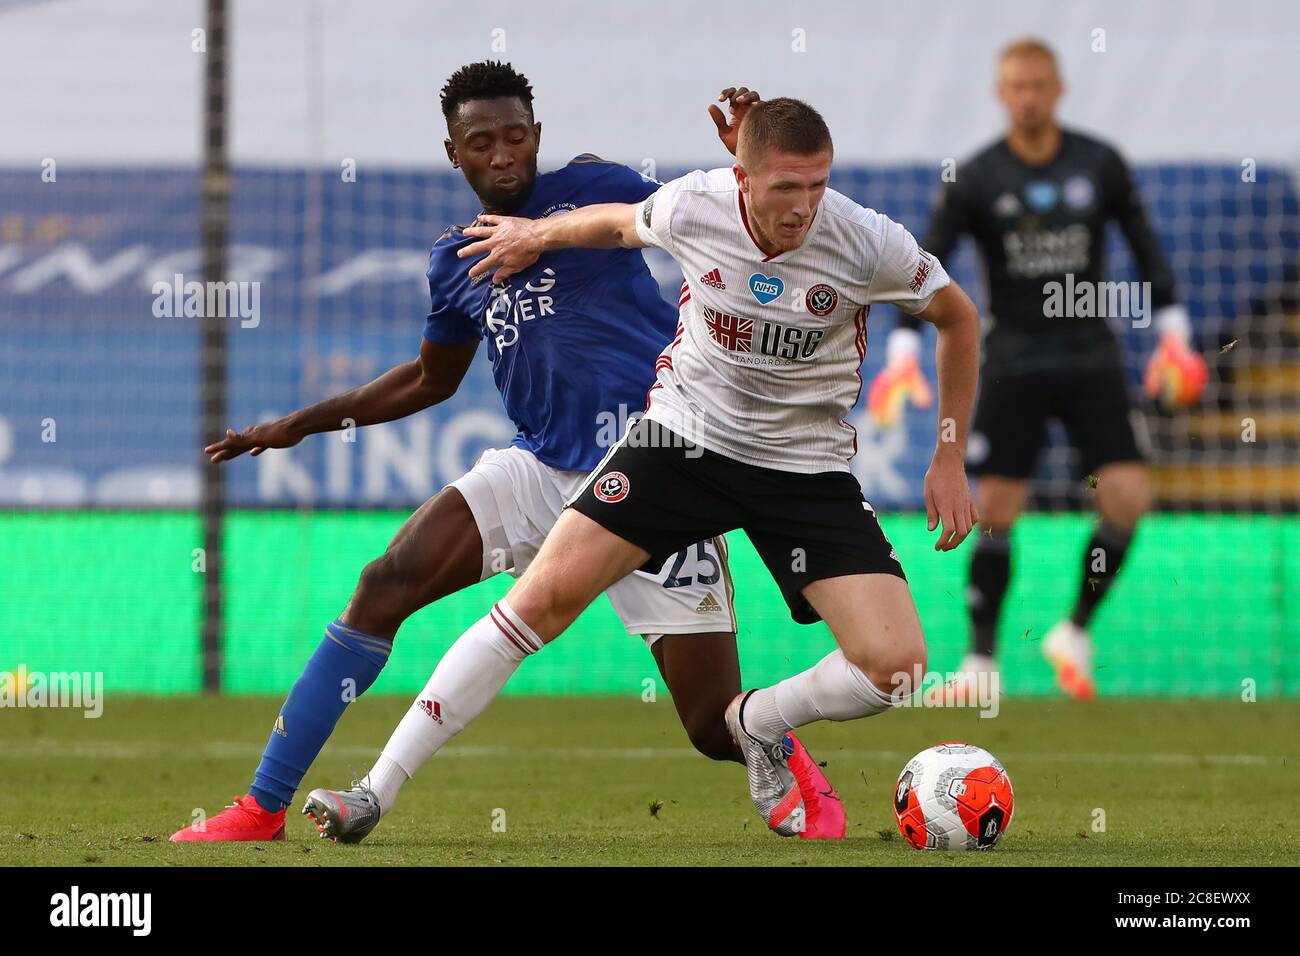 John Lundstram of Sheffield United and Wilfred Ndidi of Leicester City in action during the Premier League match between Leicester City and Sheffield United at King Power Stadium.(Final Score; Leicester City 2 - 0 Sheffield United) Stock Photo